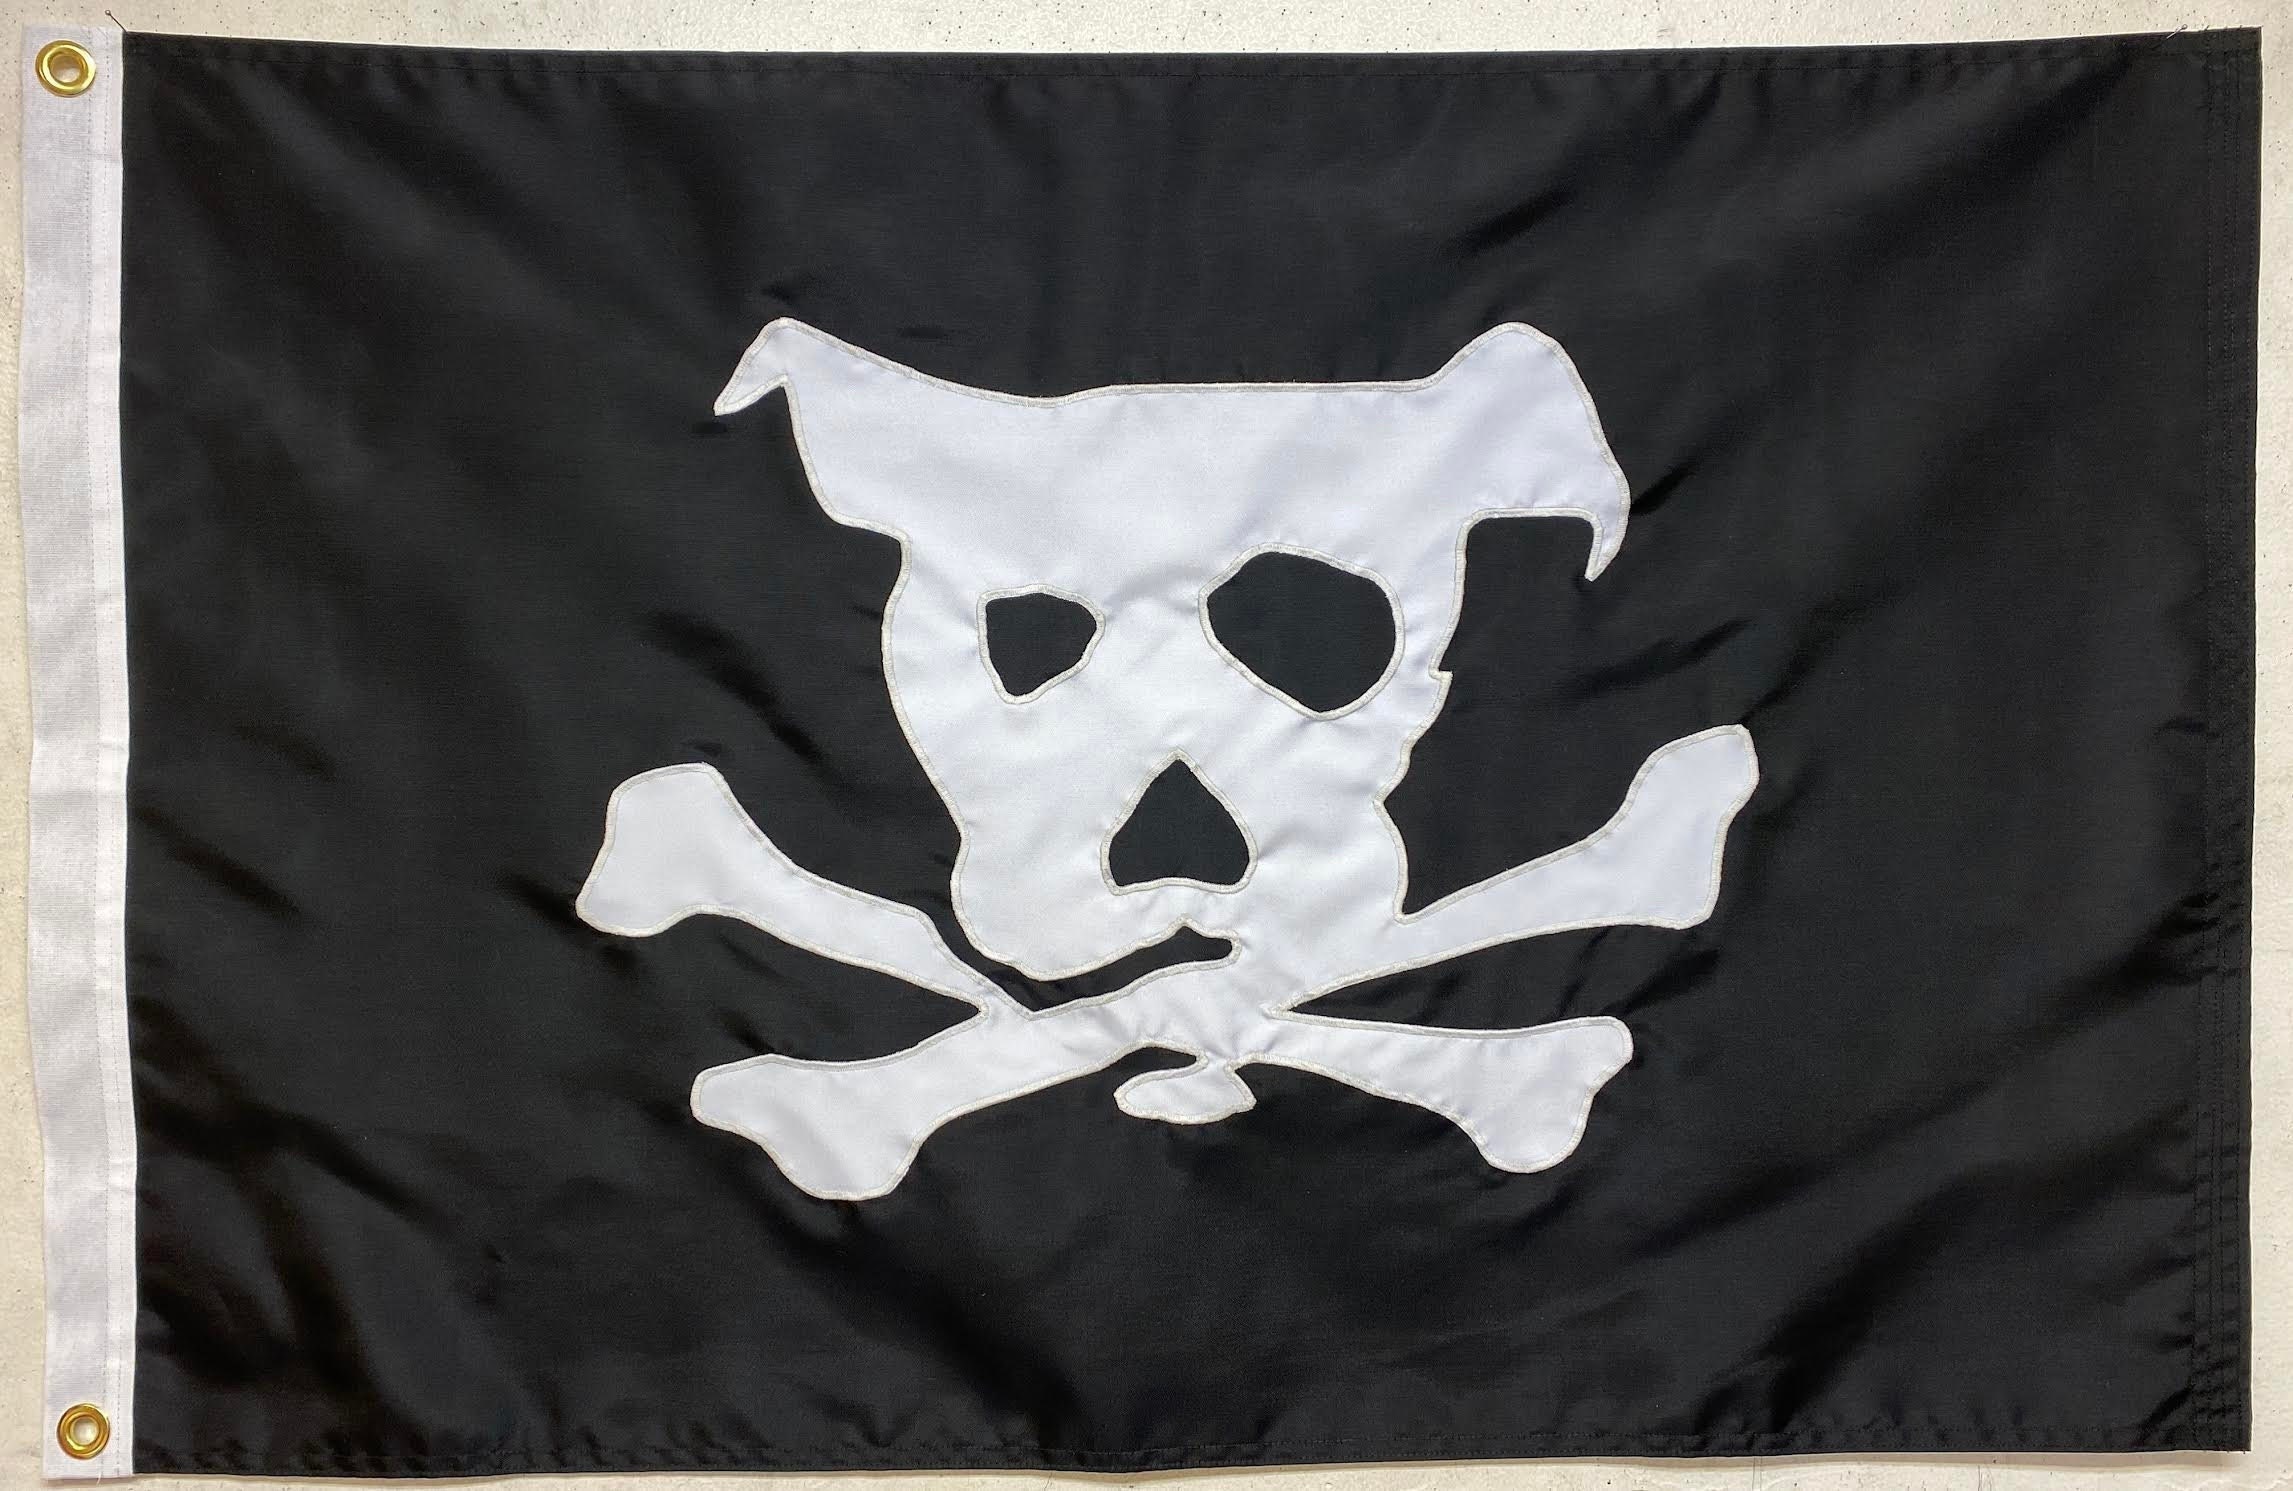 Pirate Dog Handsewn Flag various Sizes : Appliqued, High Quality, Made in  the USA, Outdoor, Handmade 